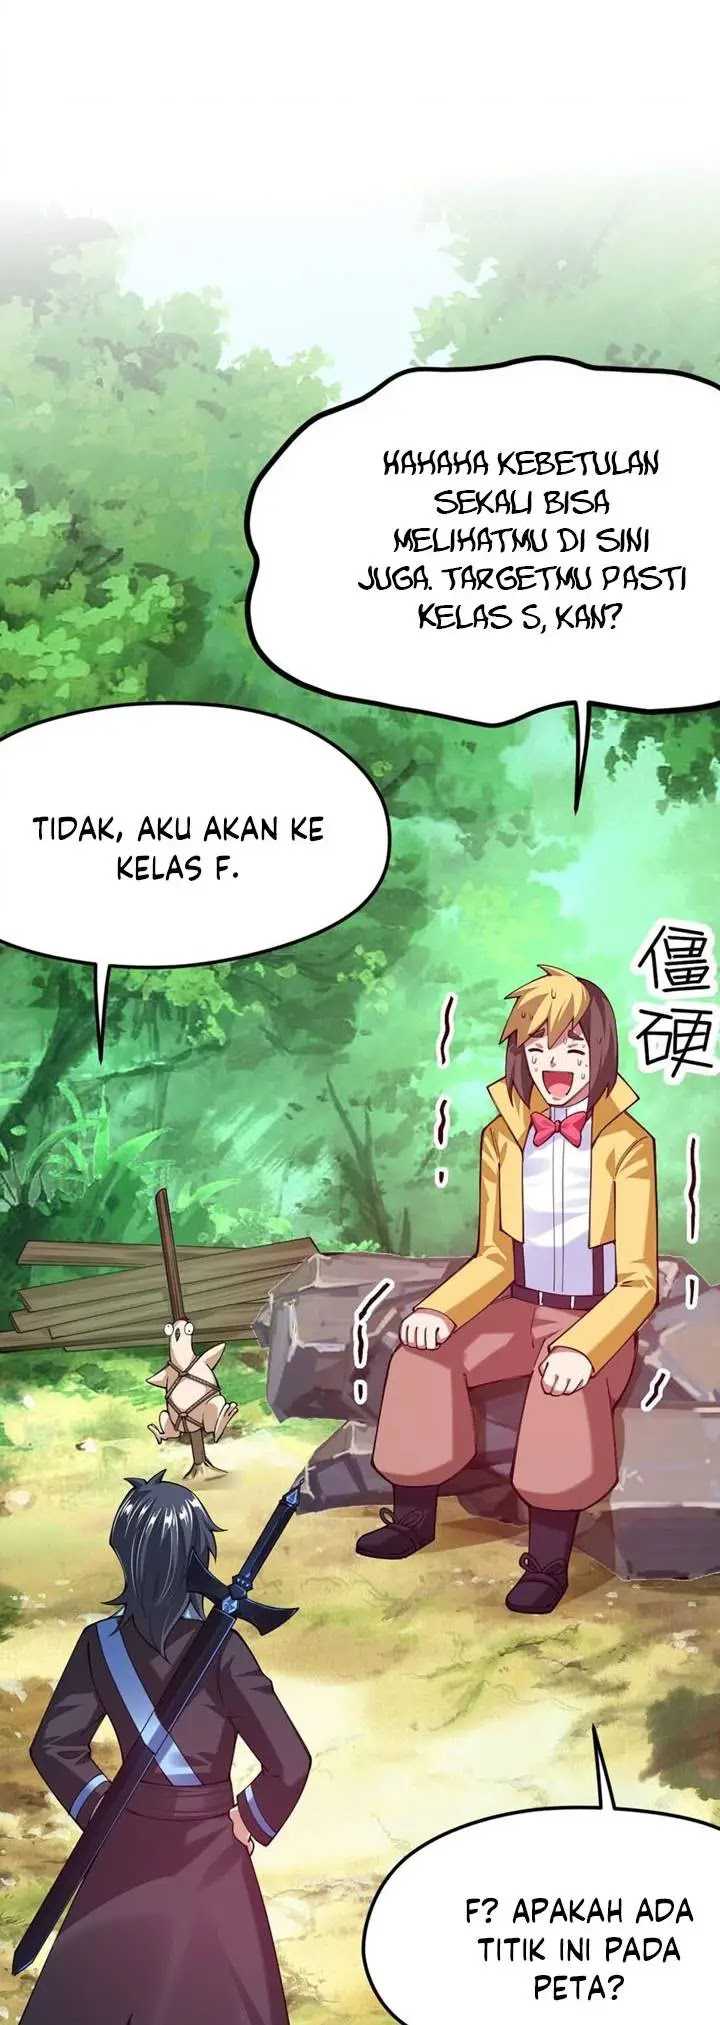 Sword God’s Life Is Not That Boring Chapter 41 Bahasa Indonesia